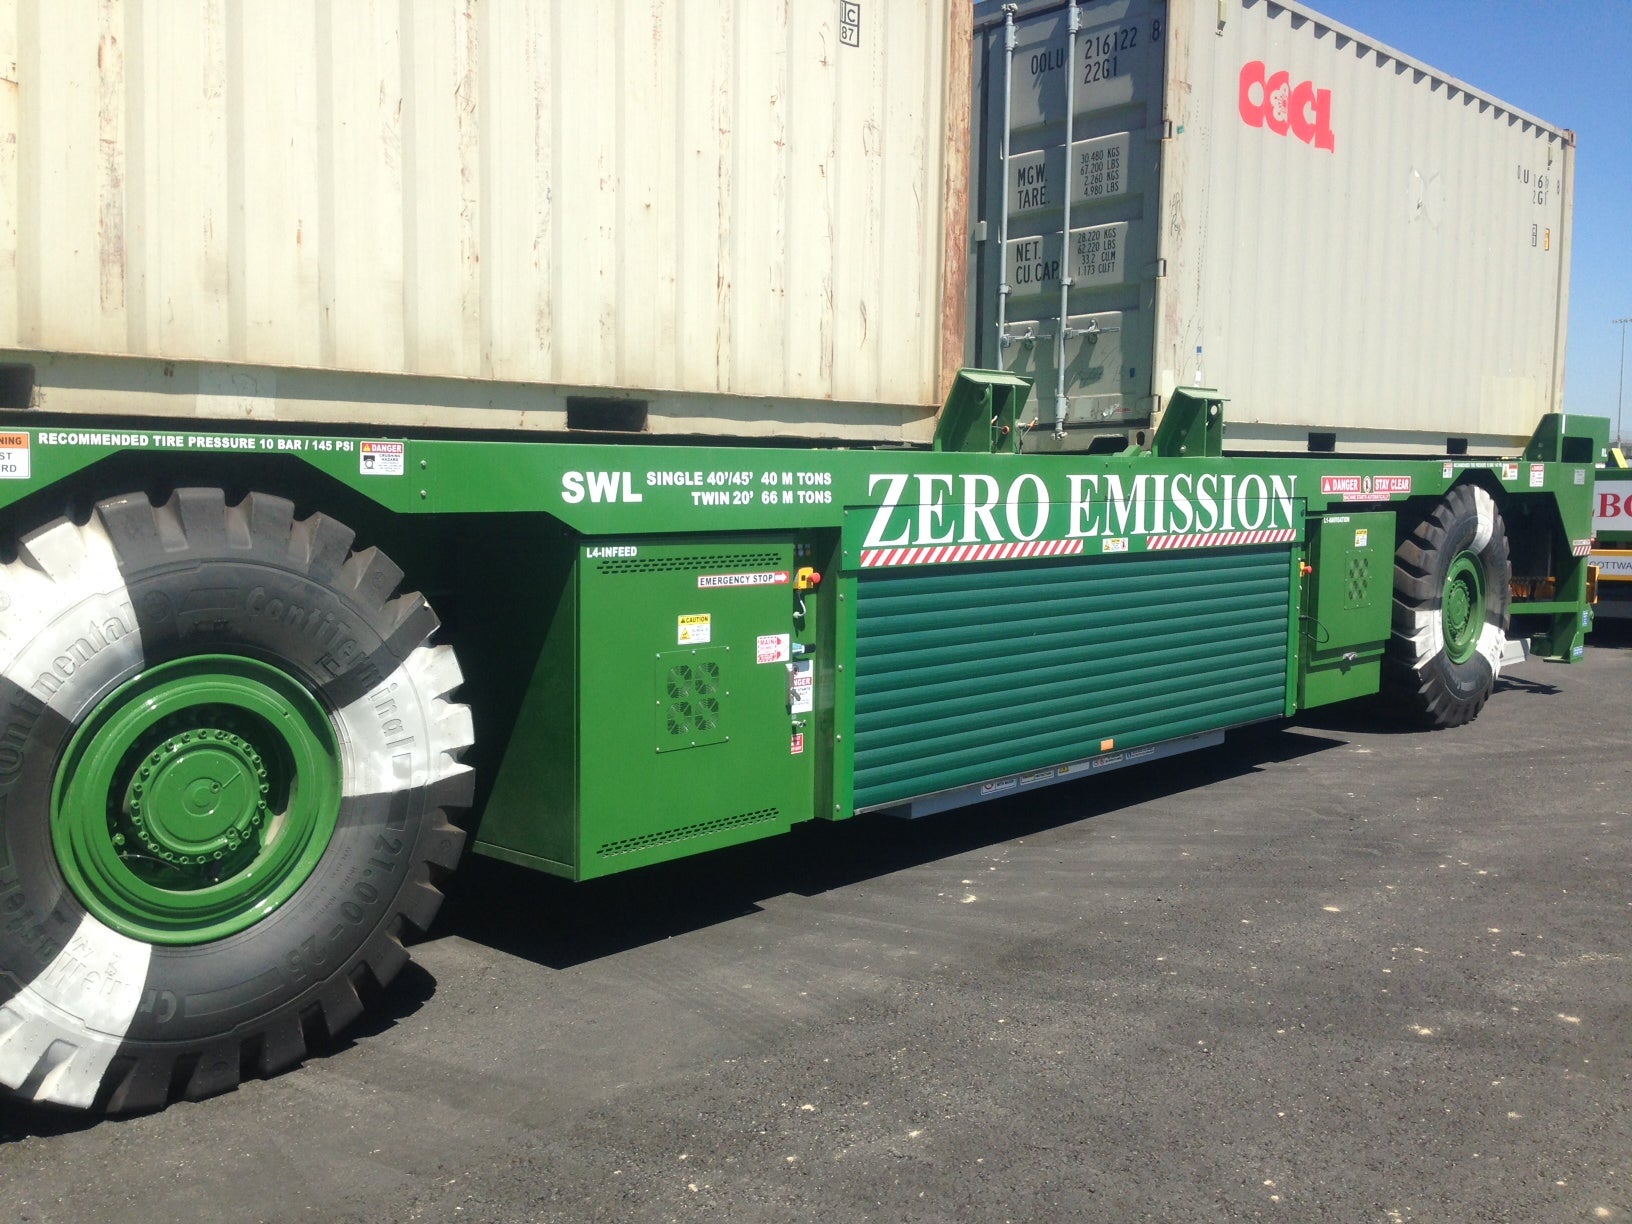 A zero emissions truck at the Port of Long Beach, California.